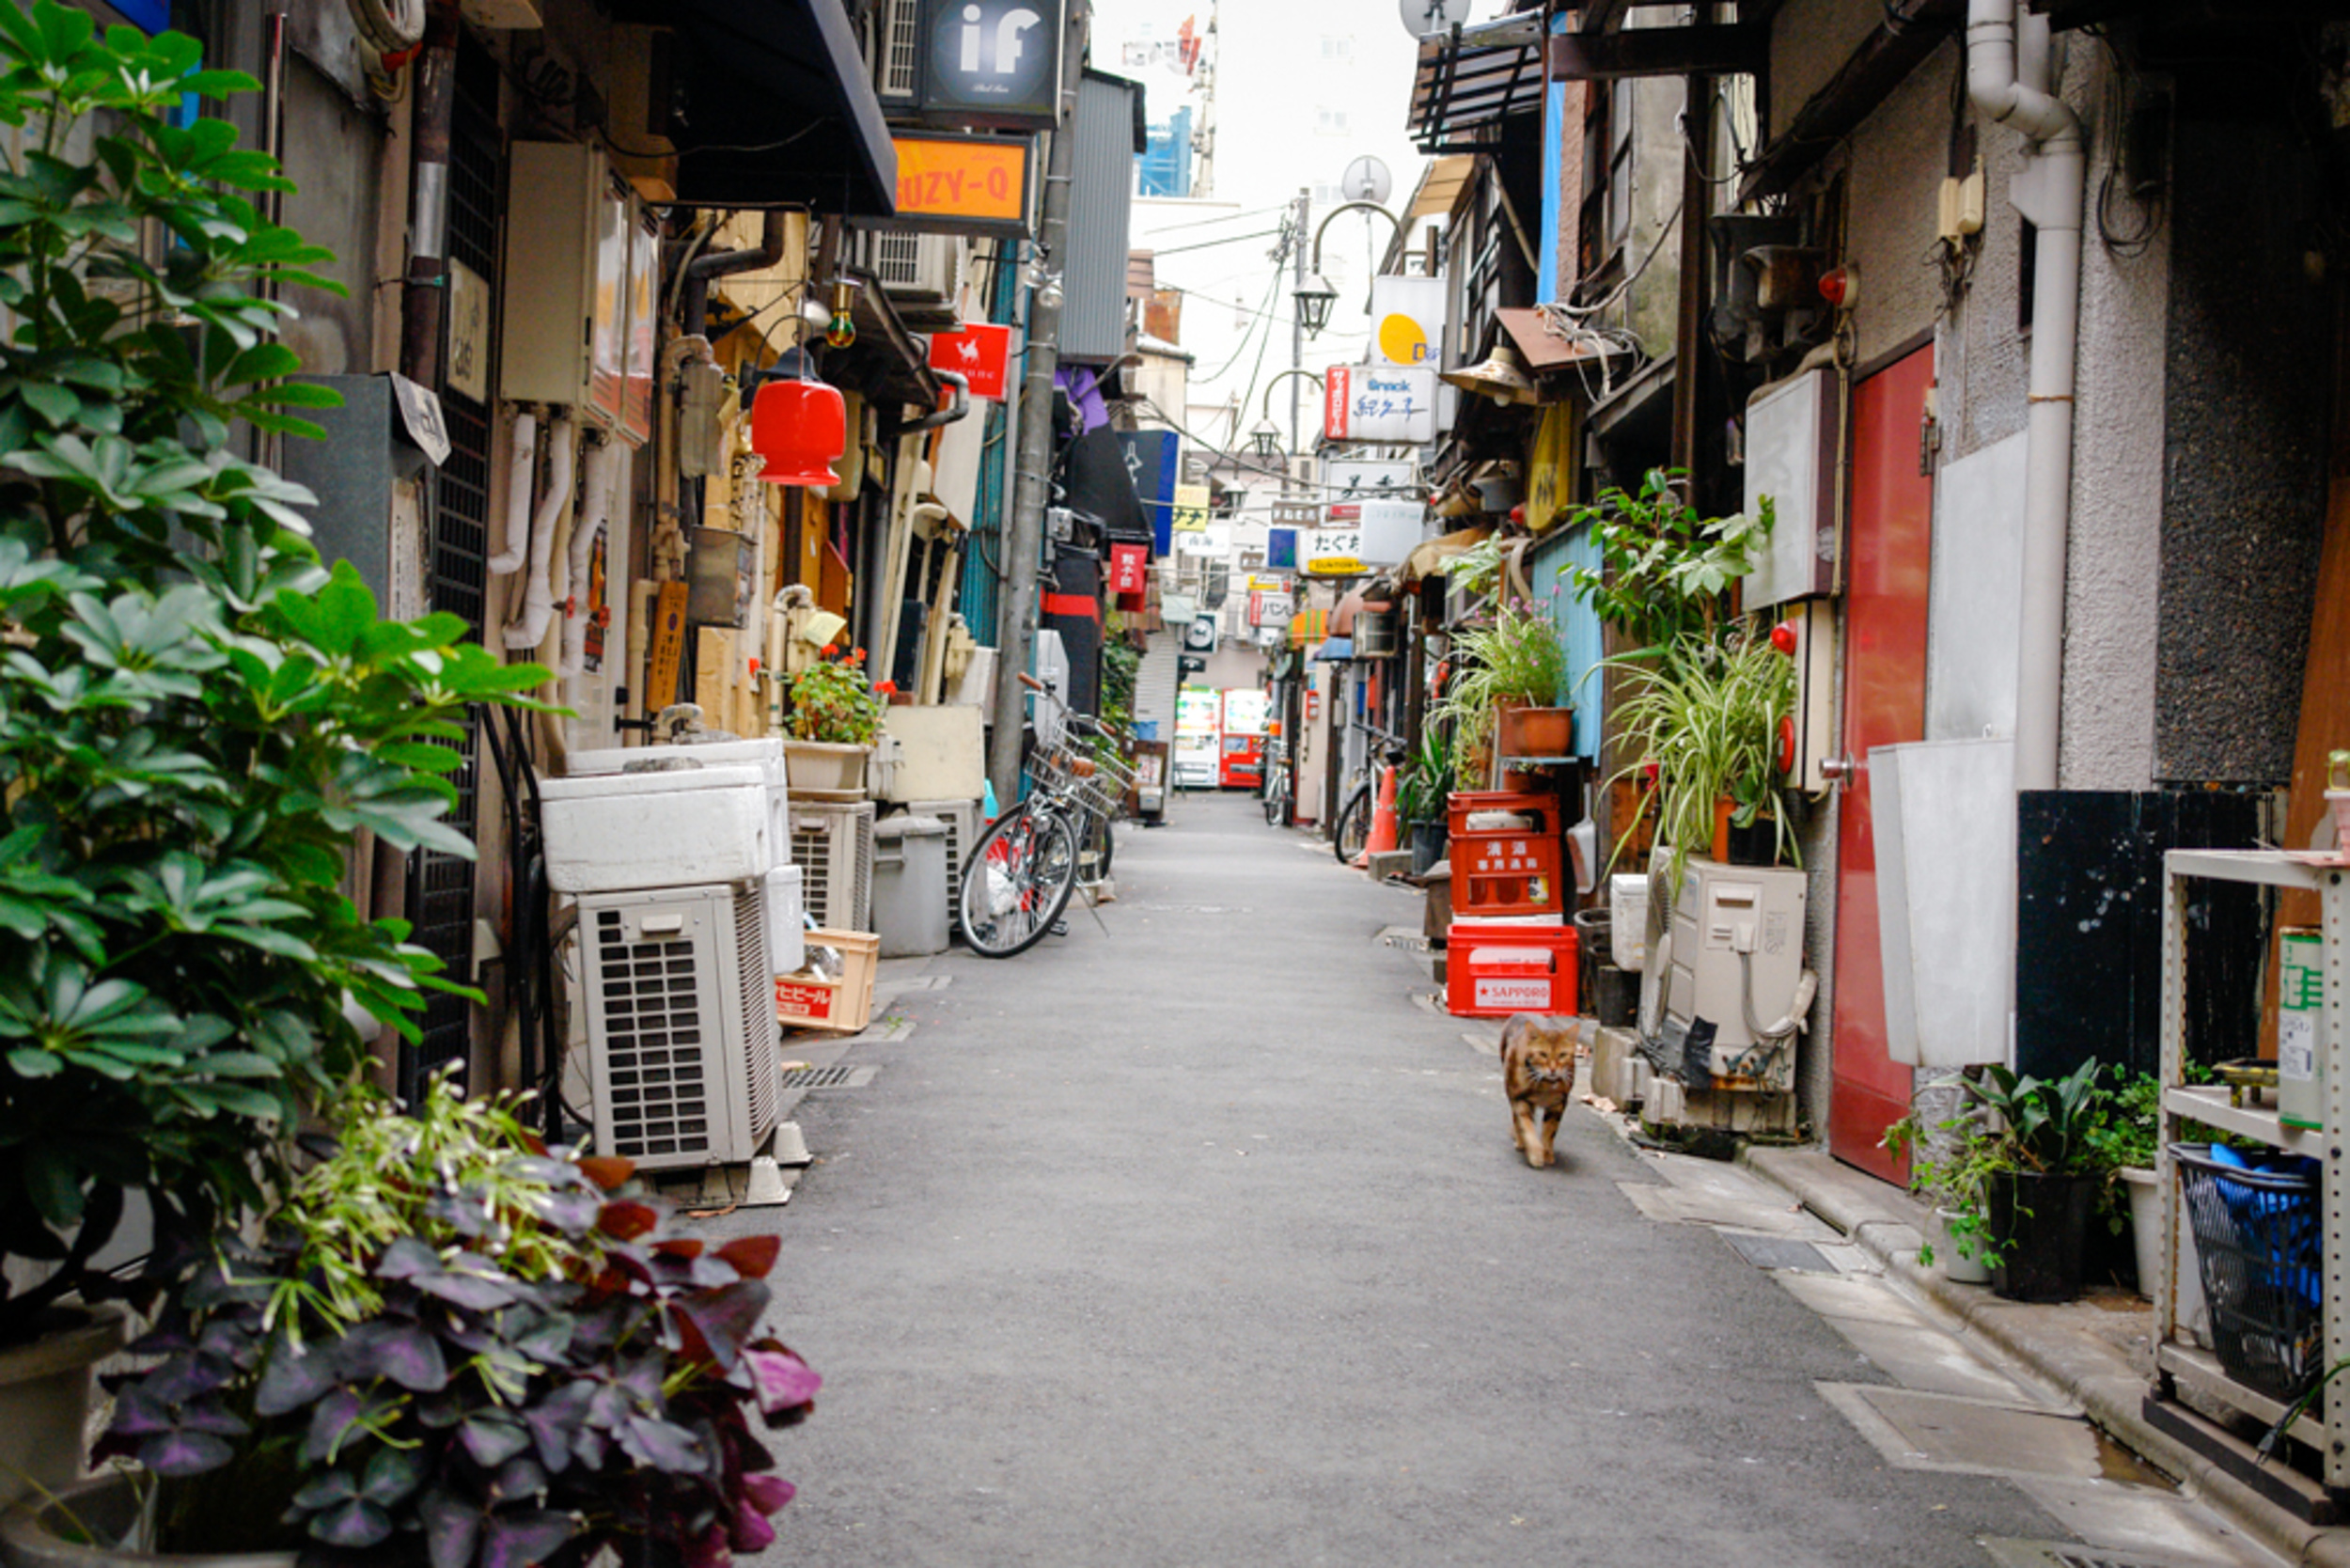 <p>Sake, karaoke, bright lights—what's more Japanese than that? There are 280 bars crammed into four streets in Golden Gai, each with about 15 seats. It's a choose-your-own adventure with no wrong options and the same ending every time: you're hammered in Tokyo.</p><p><a href='https://www.msn.com/en-us/community/channel/vid-cj9pqbr0vn9in2b6ddcd8sfgpfq6x6utp44fssrv6mc2gtybw0us'>Follow us on MSN to see more of our exclusive lifestyle content.</a></p>